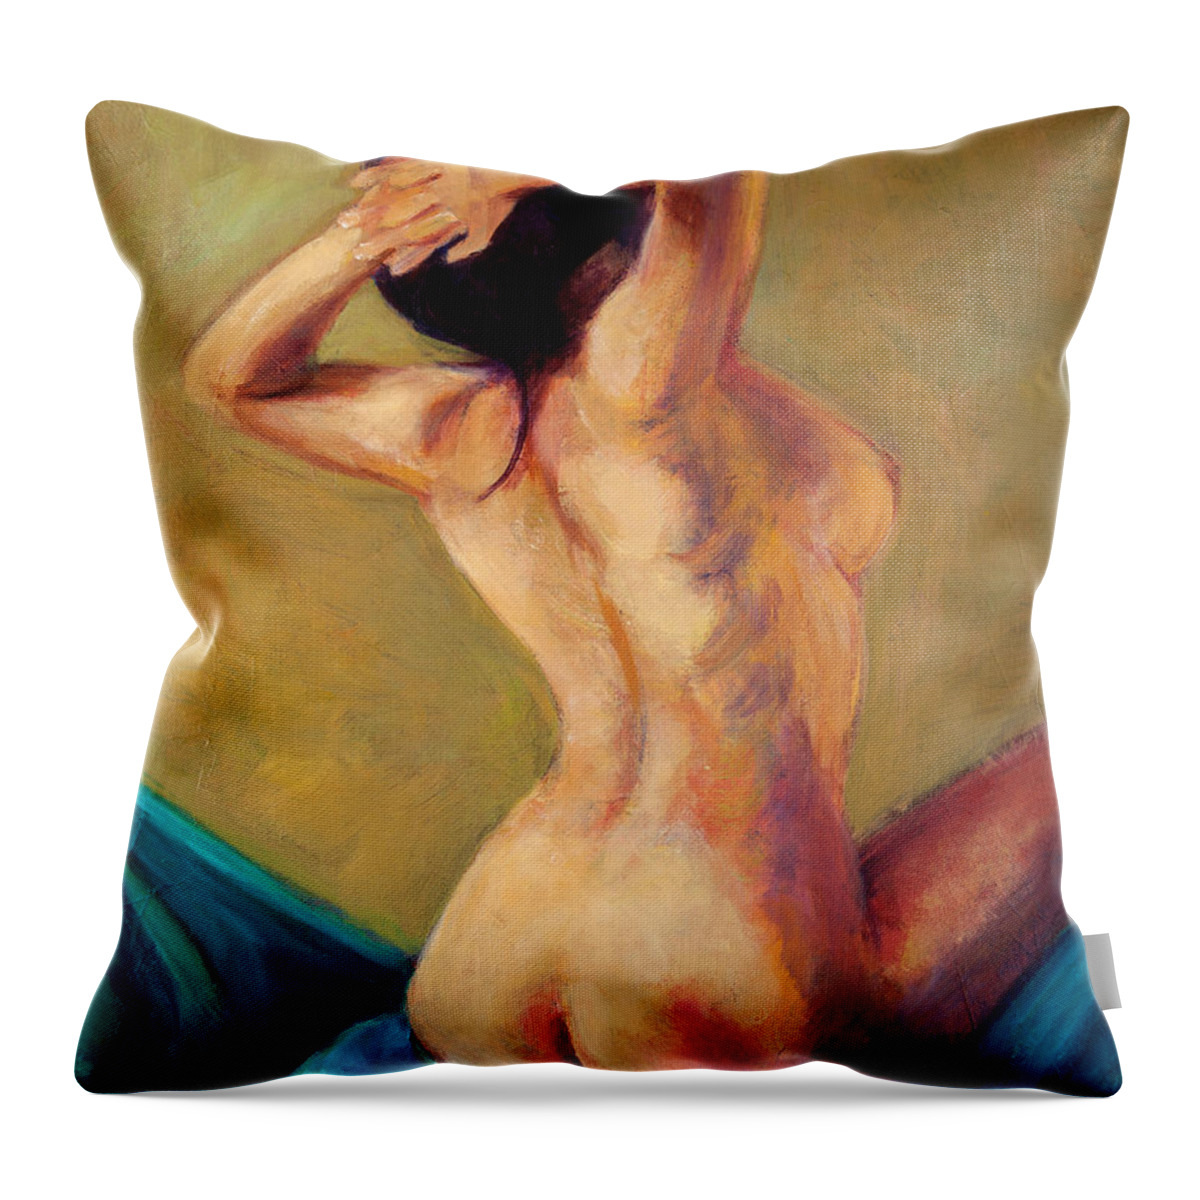 Nude Throw Pillow featuring the painting Seated Nude by Jason Reinhardt